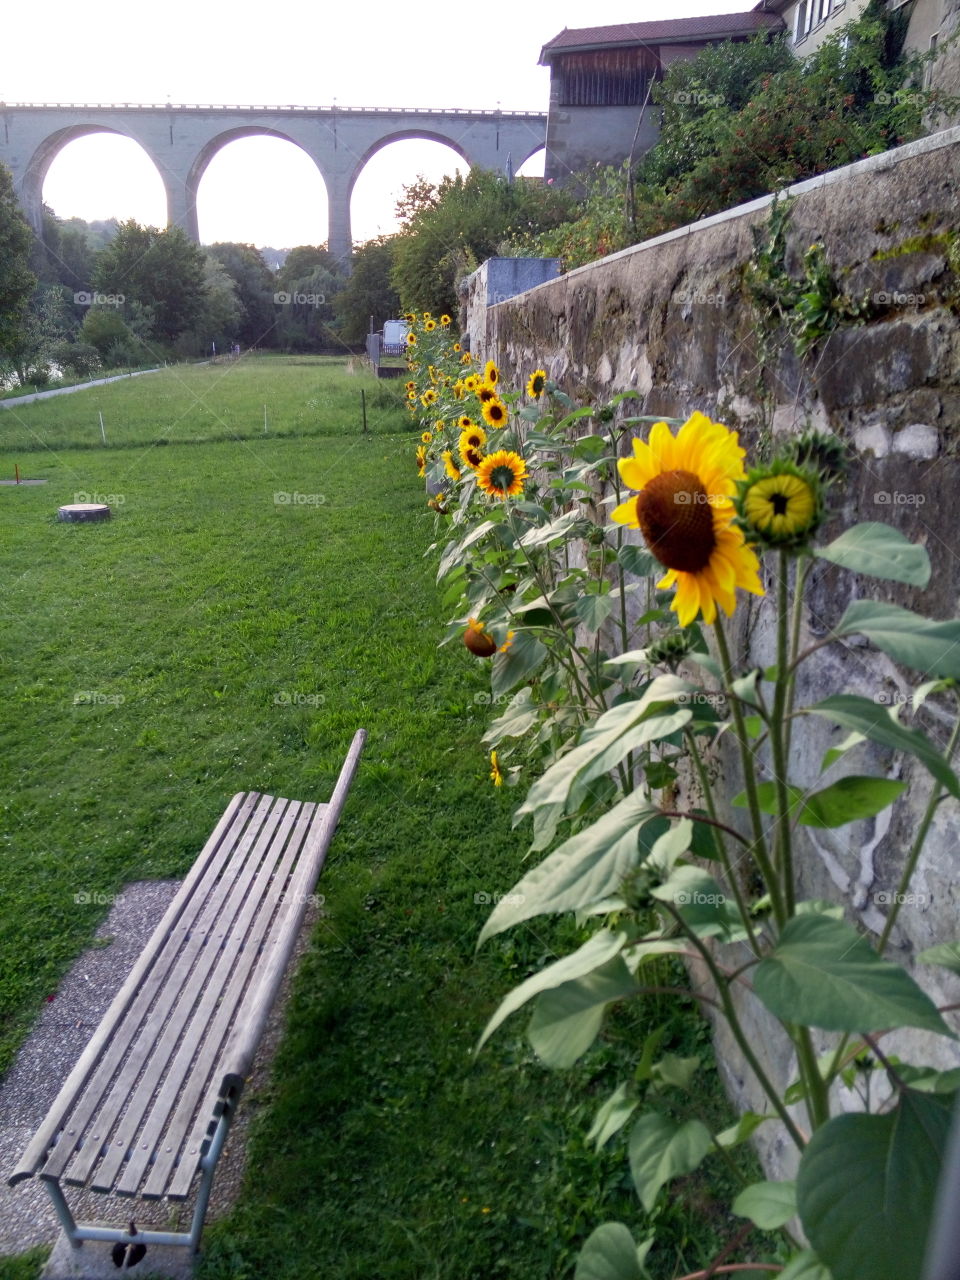 Sunflowers near the river in Fribourg, Swuitzerland